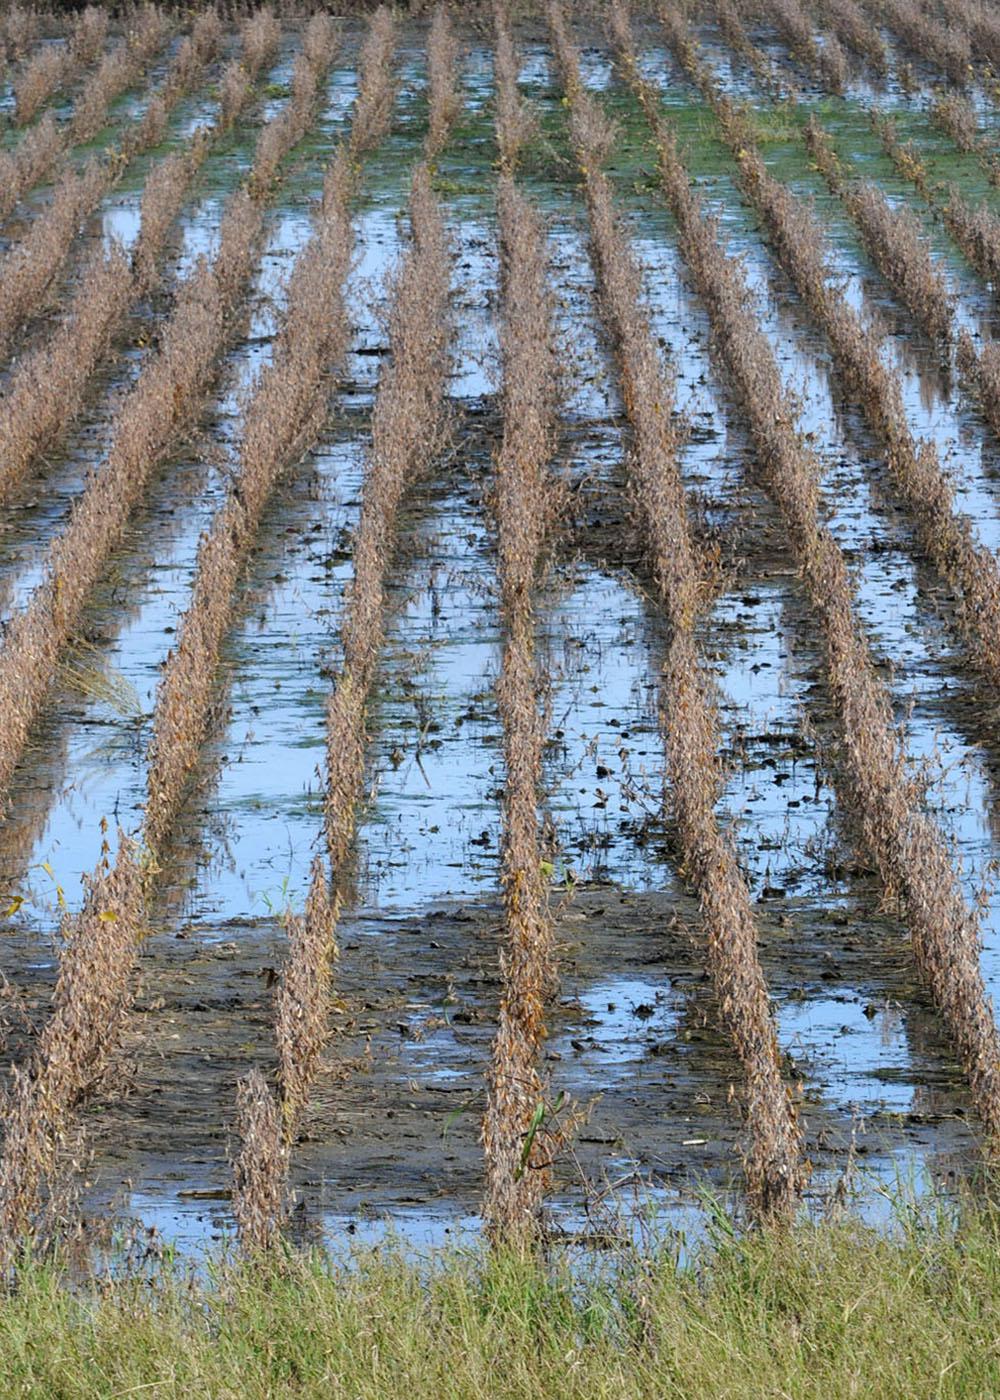 Excessive fall rains have saturated 91 percent of the state's soil, leaving many crops stranded and wasting in fields too wet for harvest equipment to enter. Water stands between most rows of this soybean field in western Lowndes County. (Photo by Scott Corey)